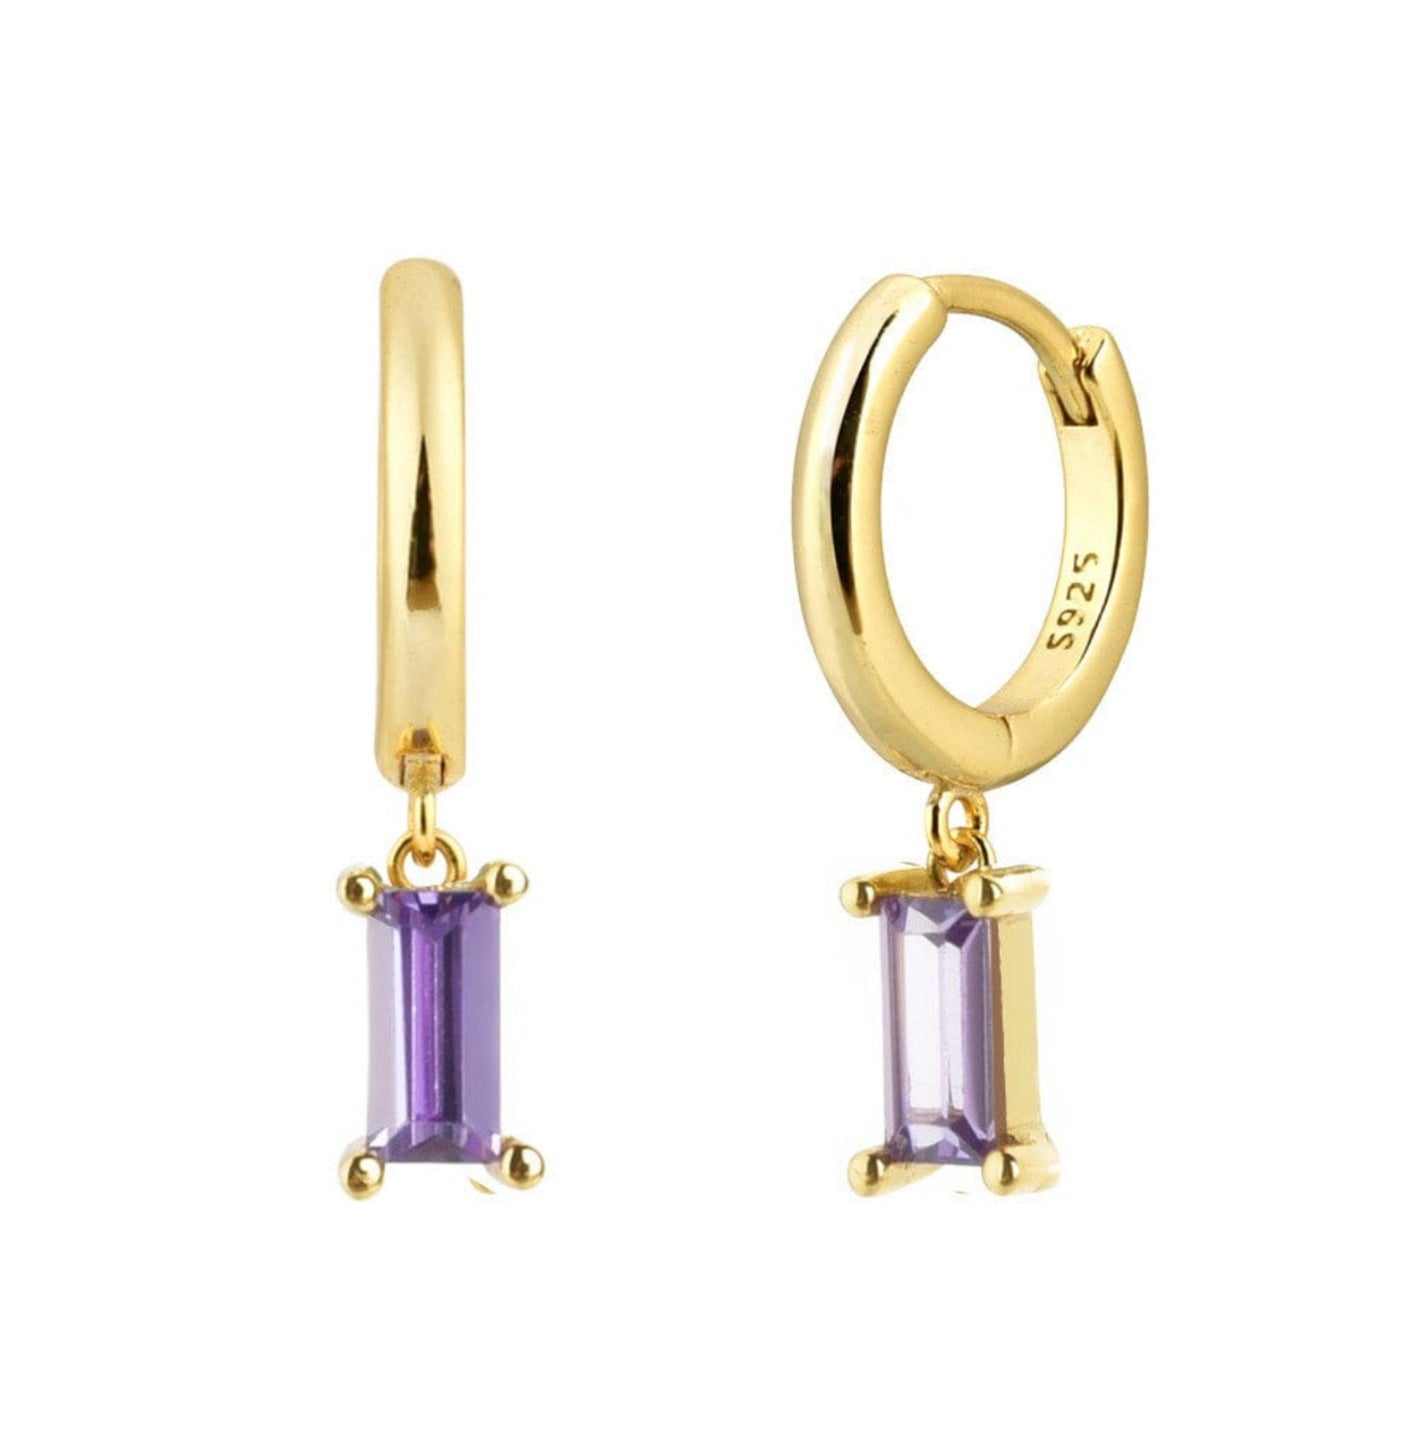 DAINTY EARRINGS earing Yubama Jewelry Online Store - The Elegant Designs of Gold and Silver ! Purple 